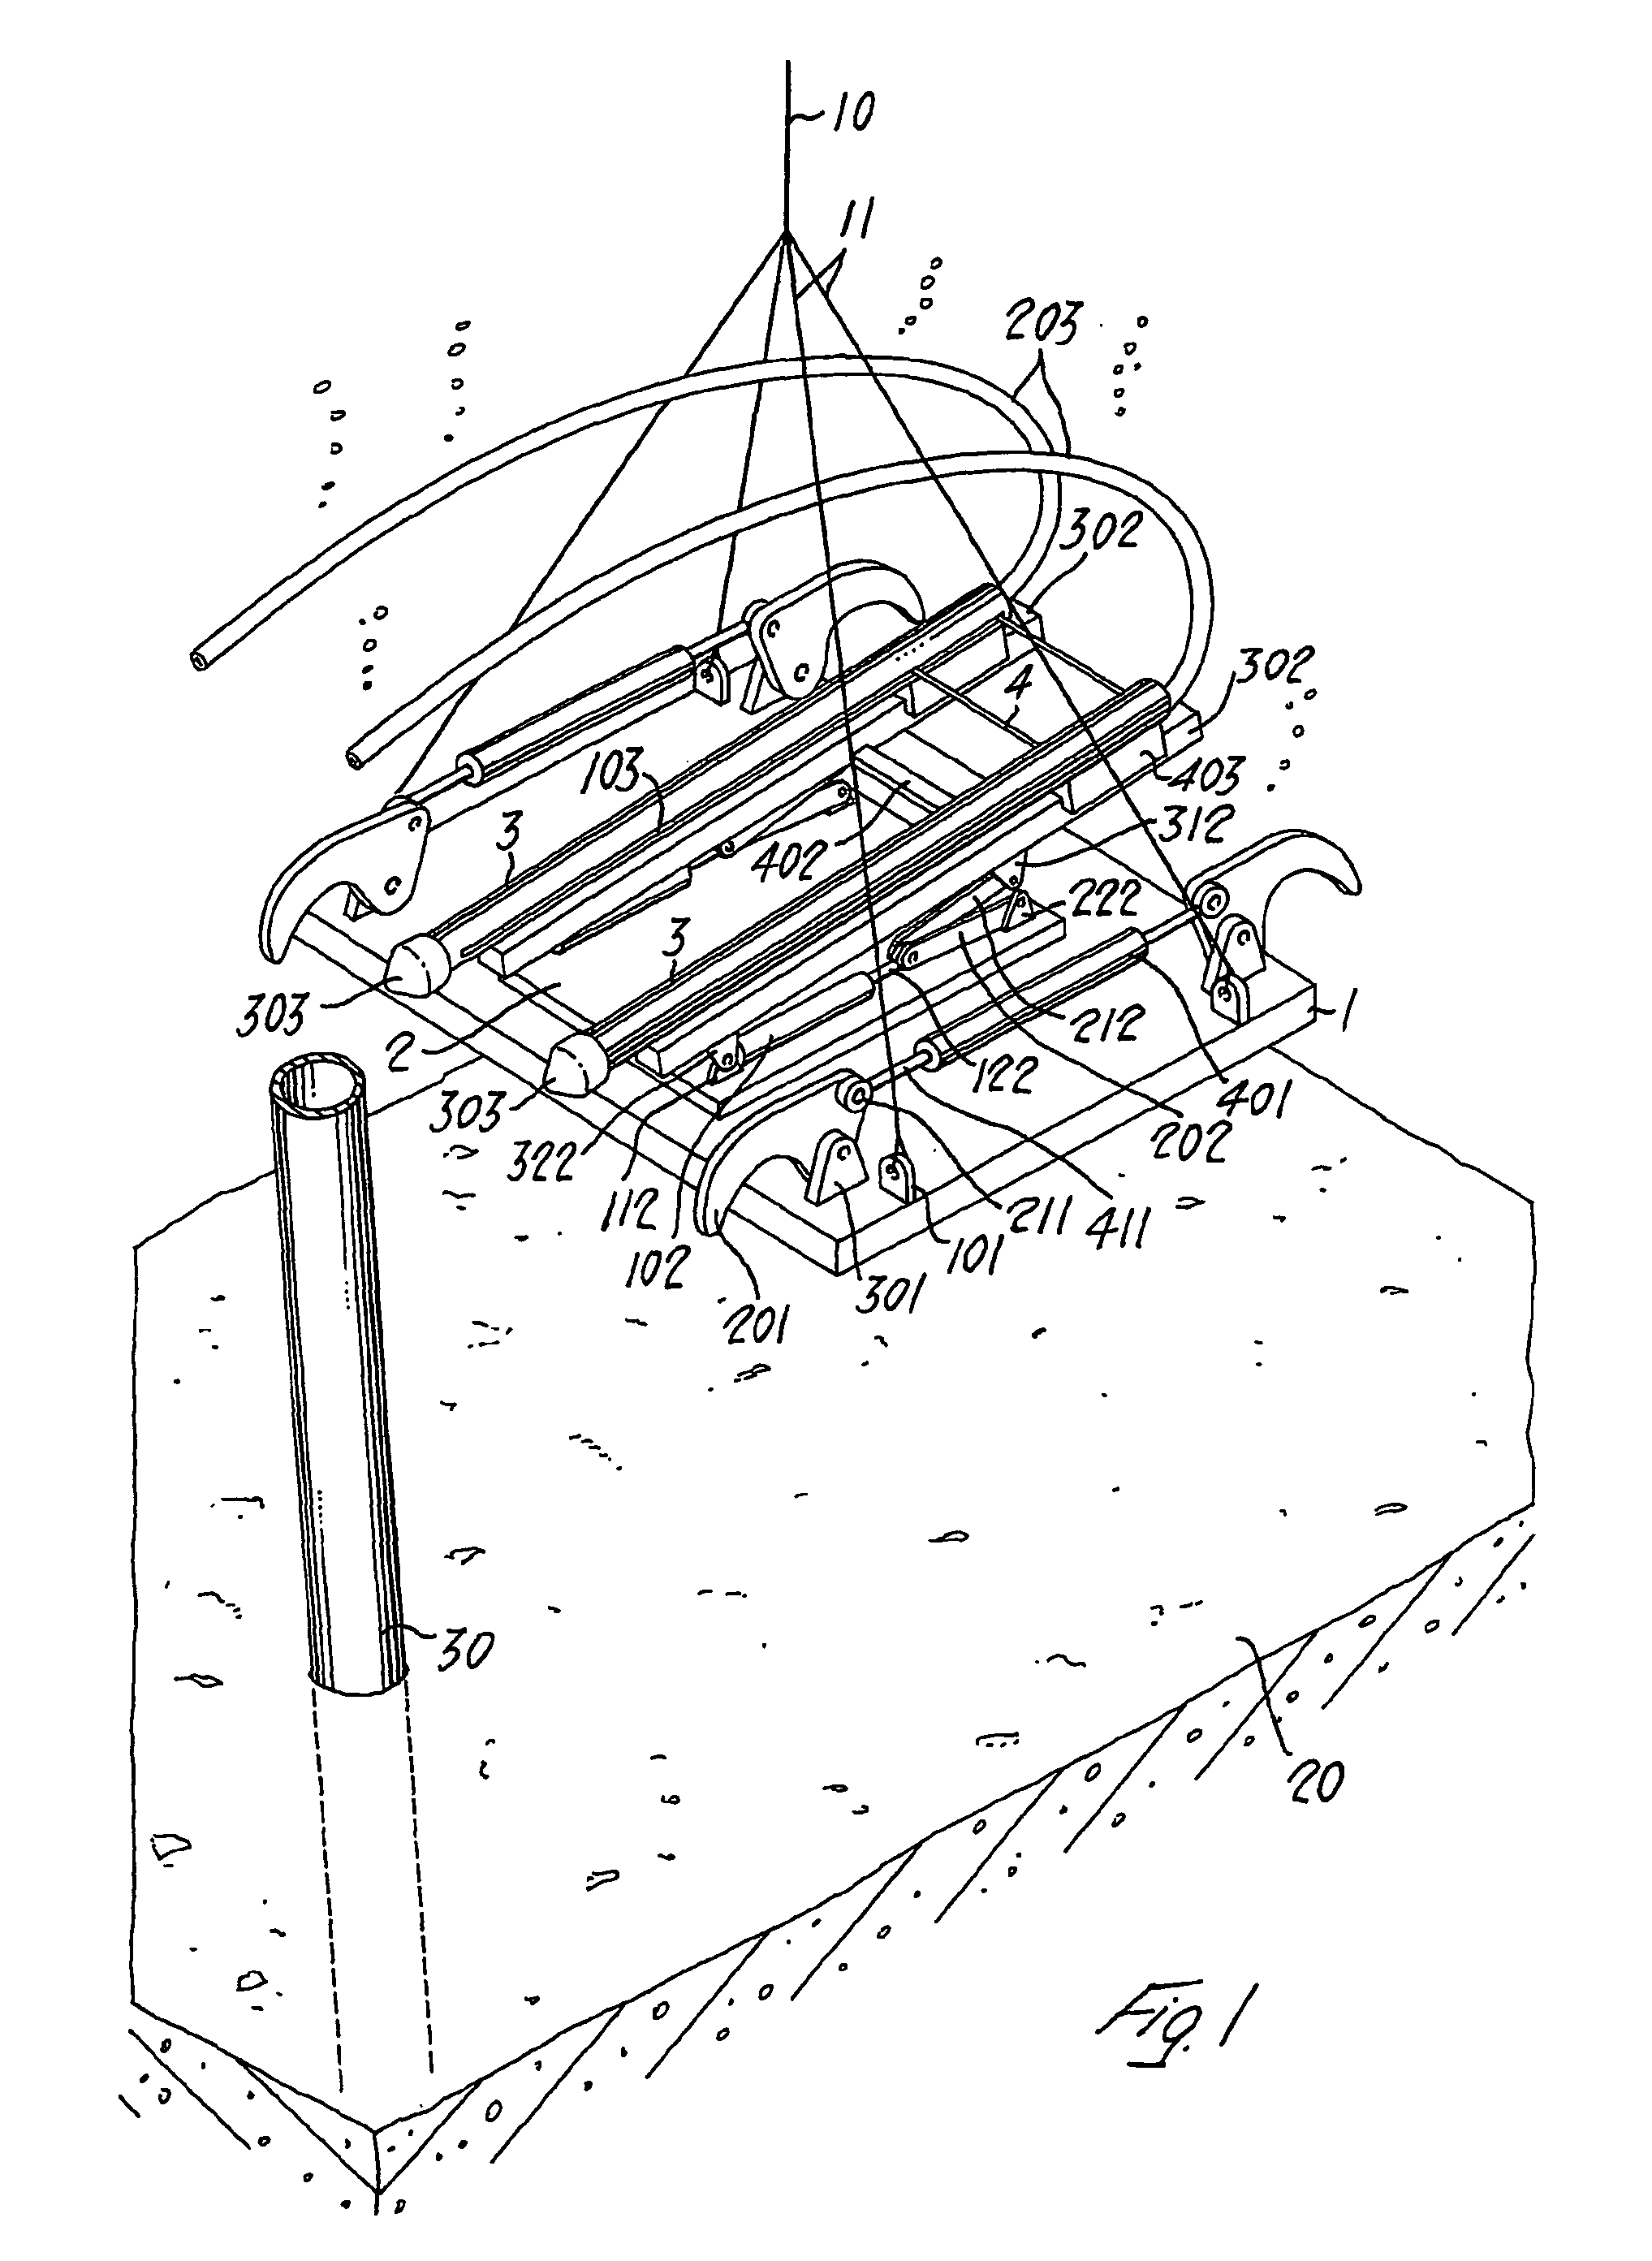 Method and apparatus for cutting underwater structures